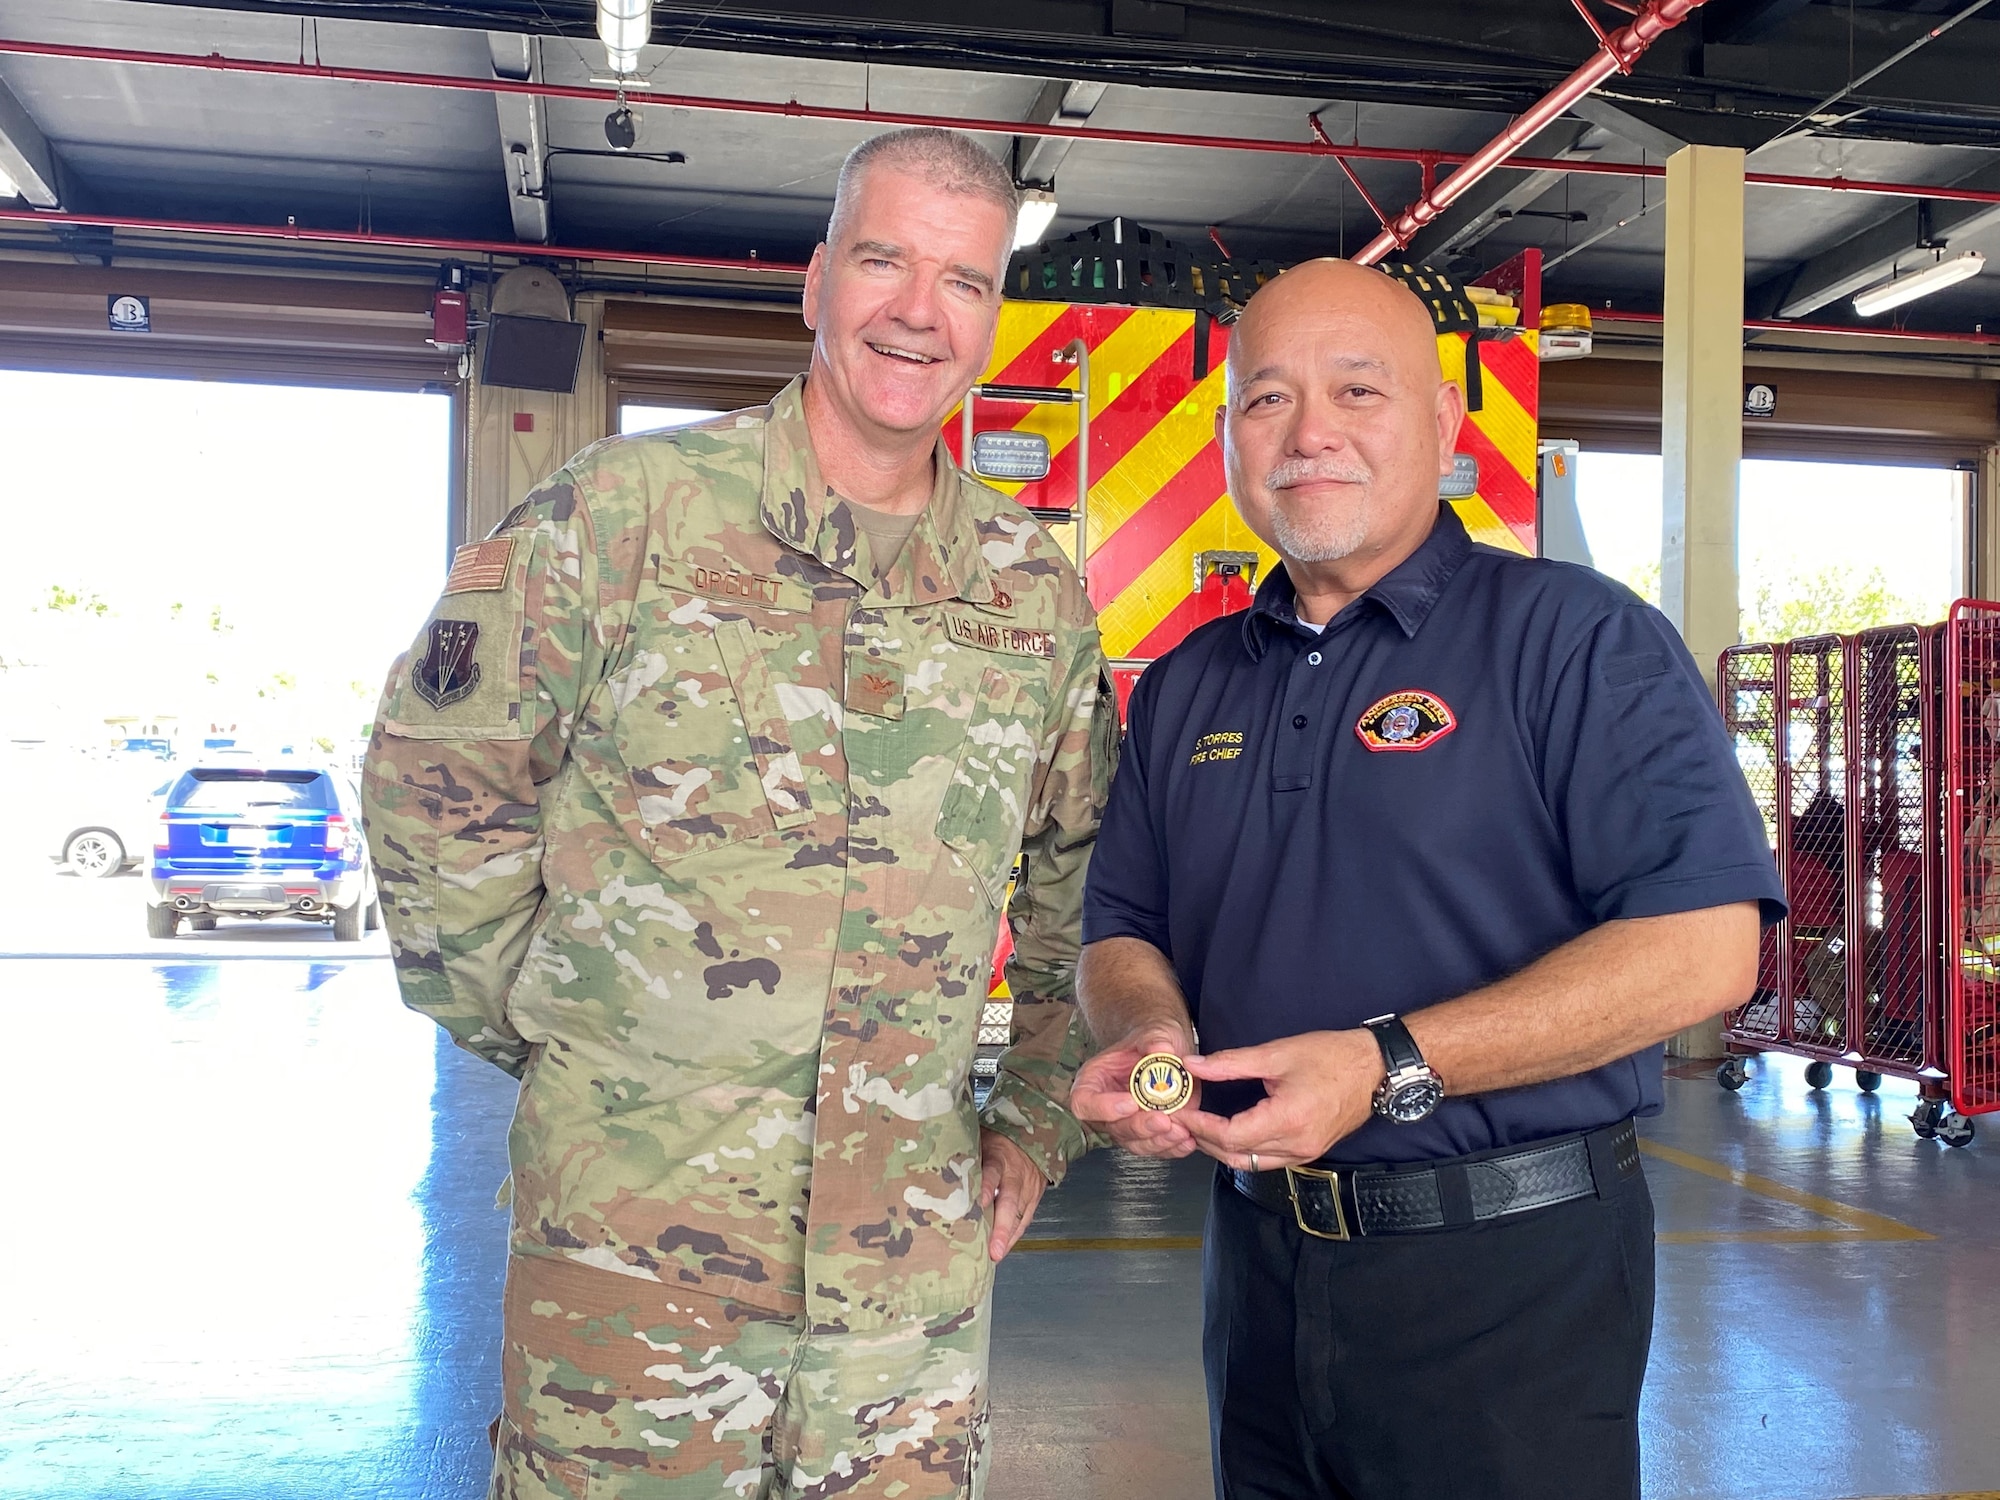 Col. Joseph Orcutt stands with Fire Chief Stanley Torres, who showcases challenge coin.